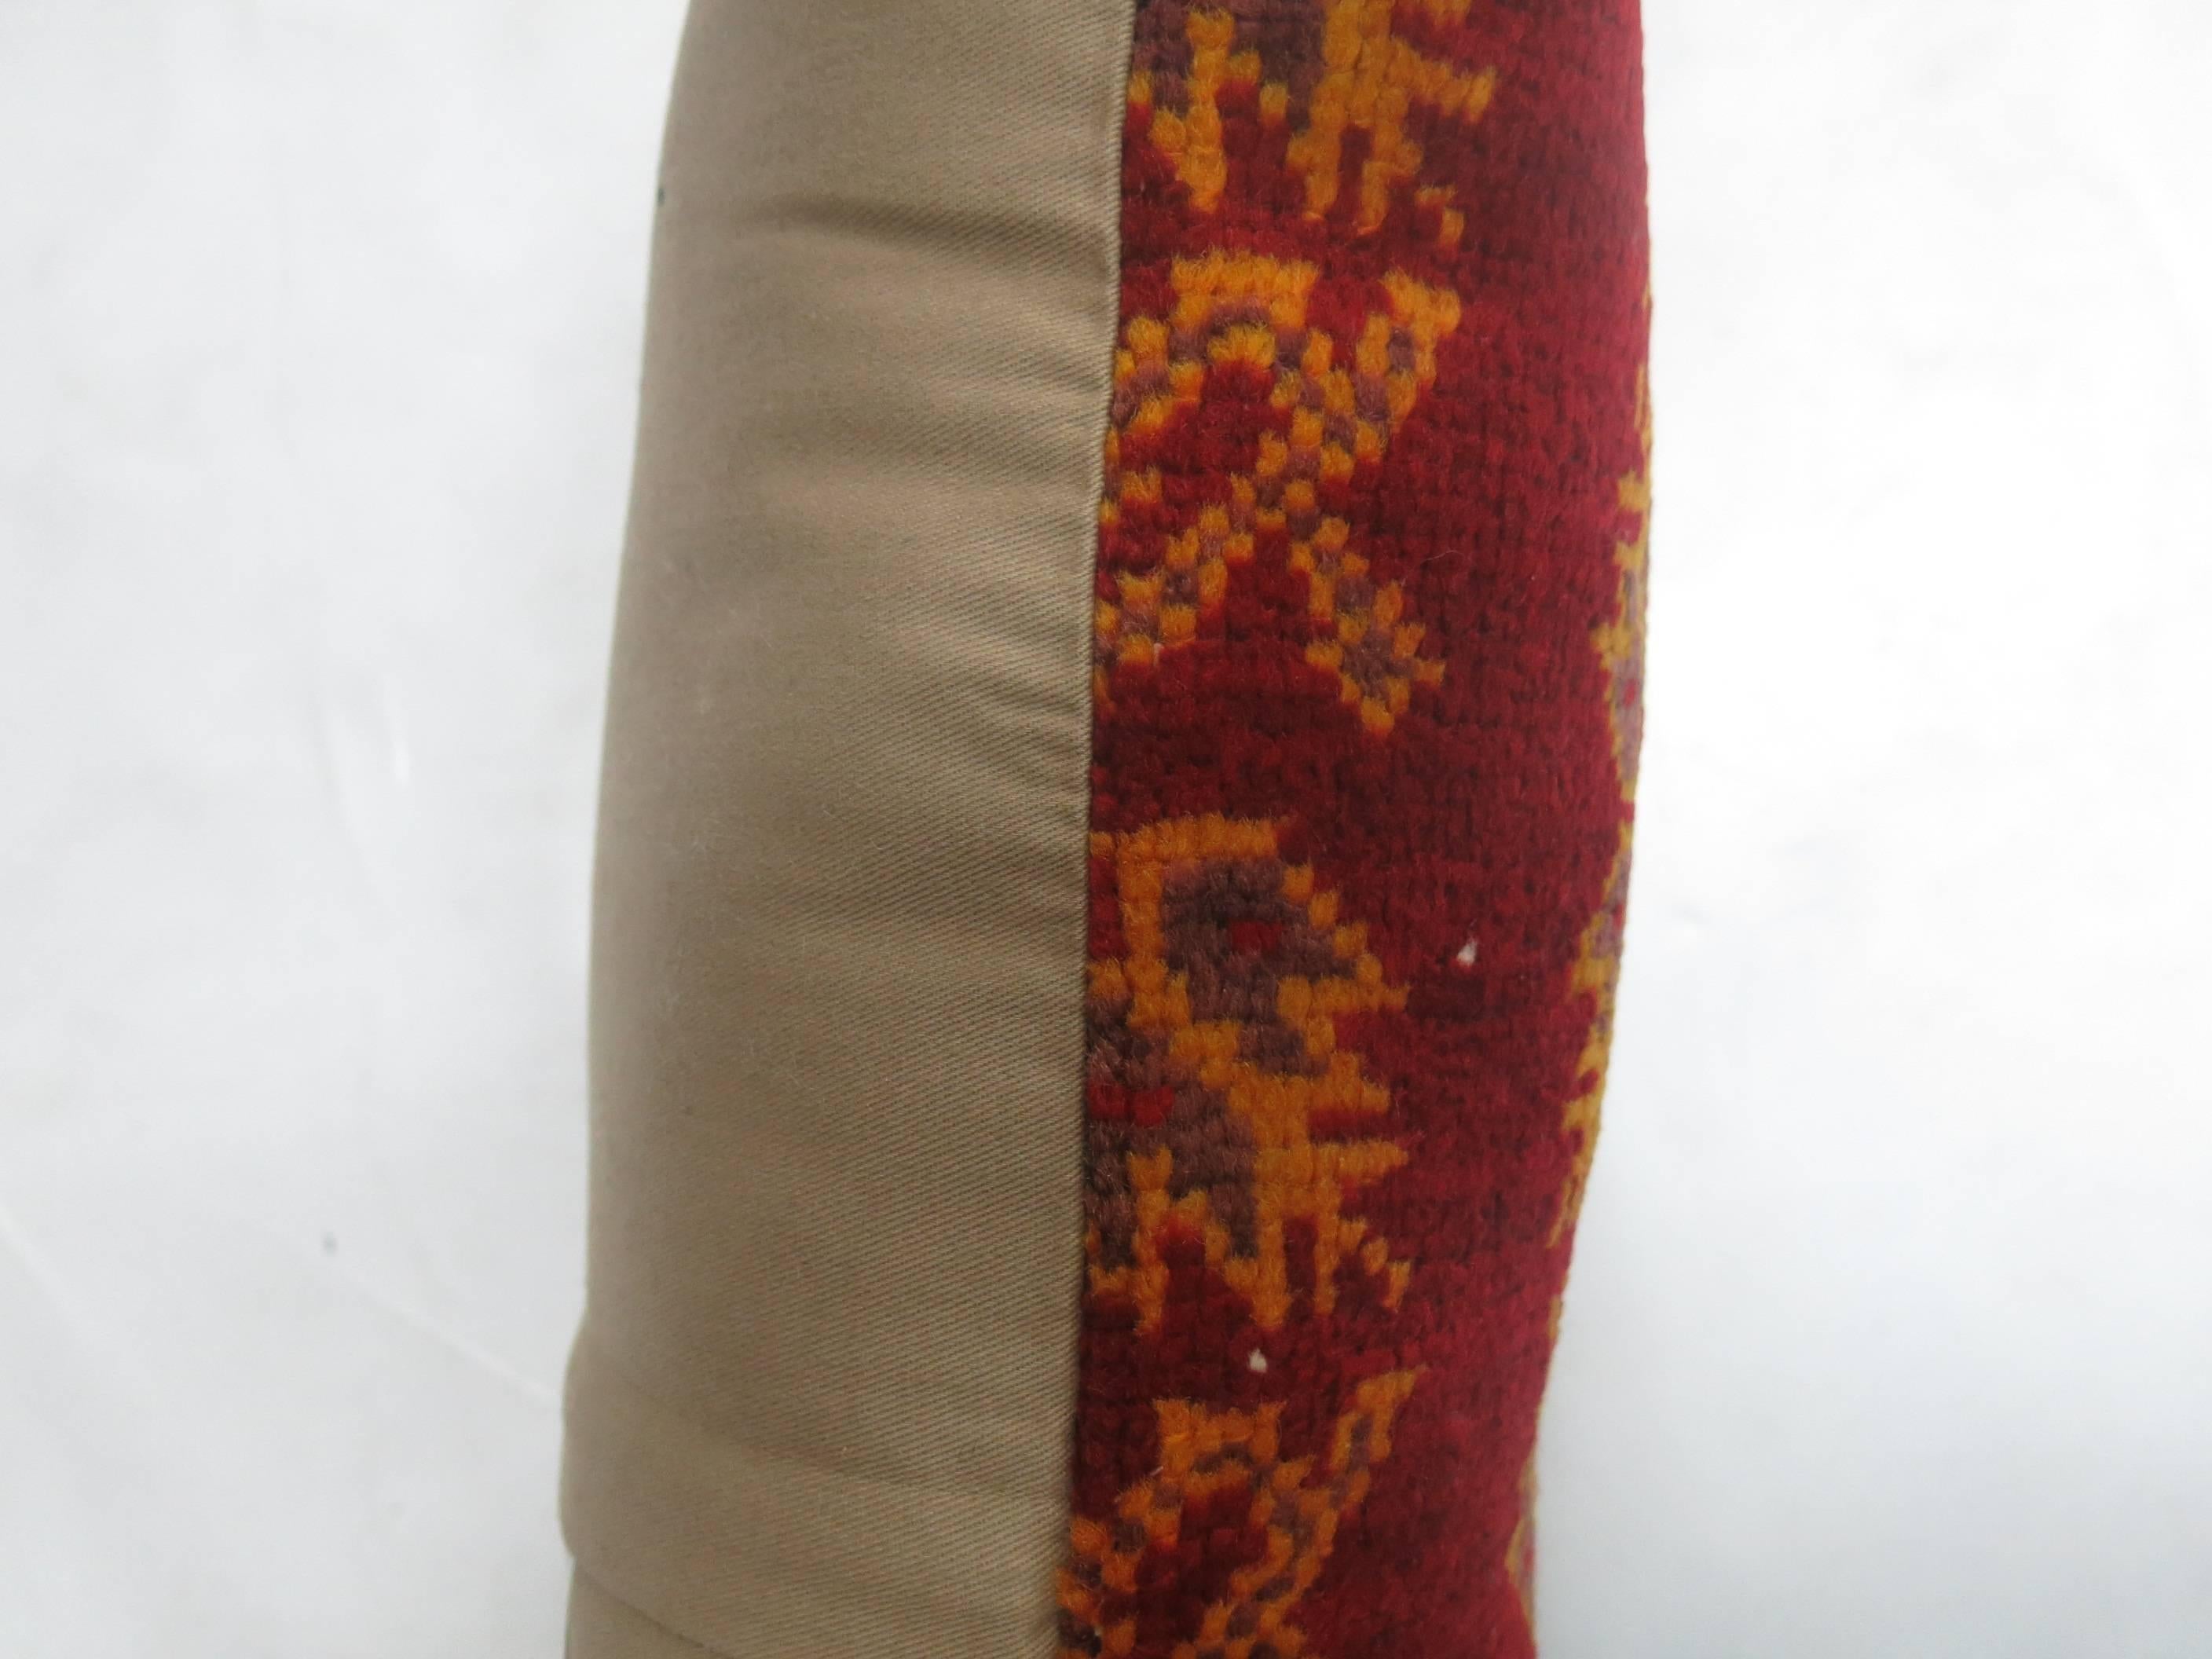 Lumbar size pillow from a red Turkish Anatolian rug.